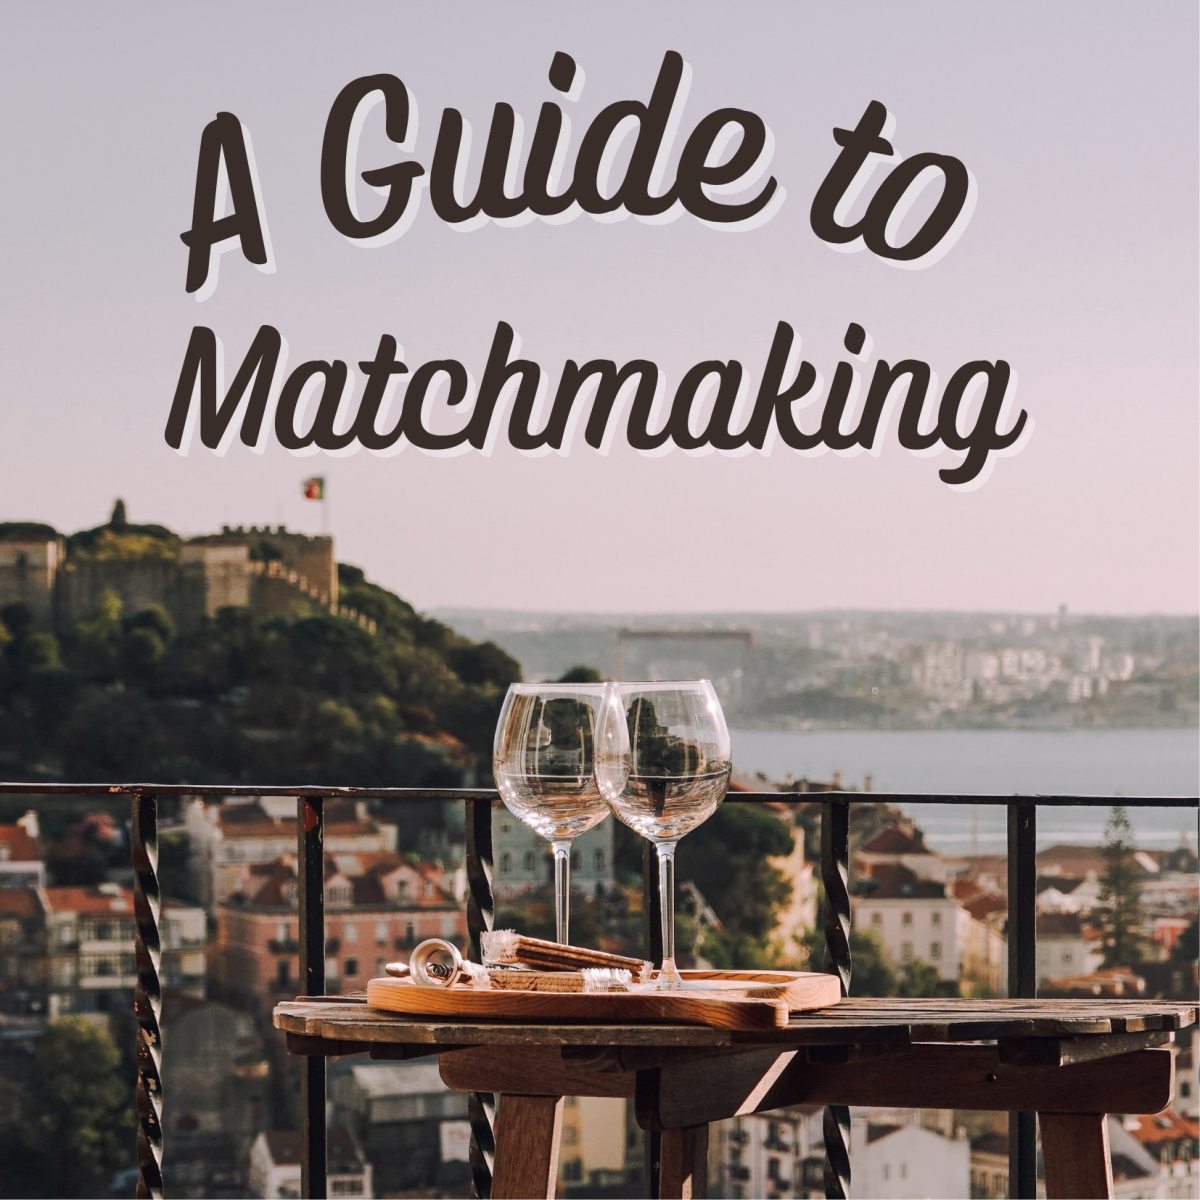 These tips can help you bring two friends together in a romantic relationship.